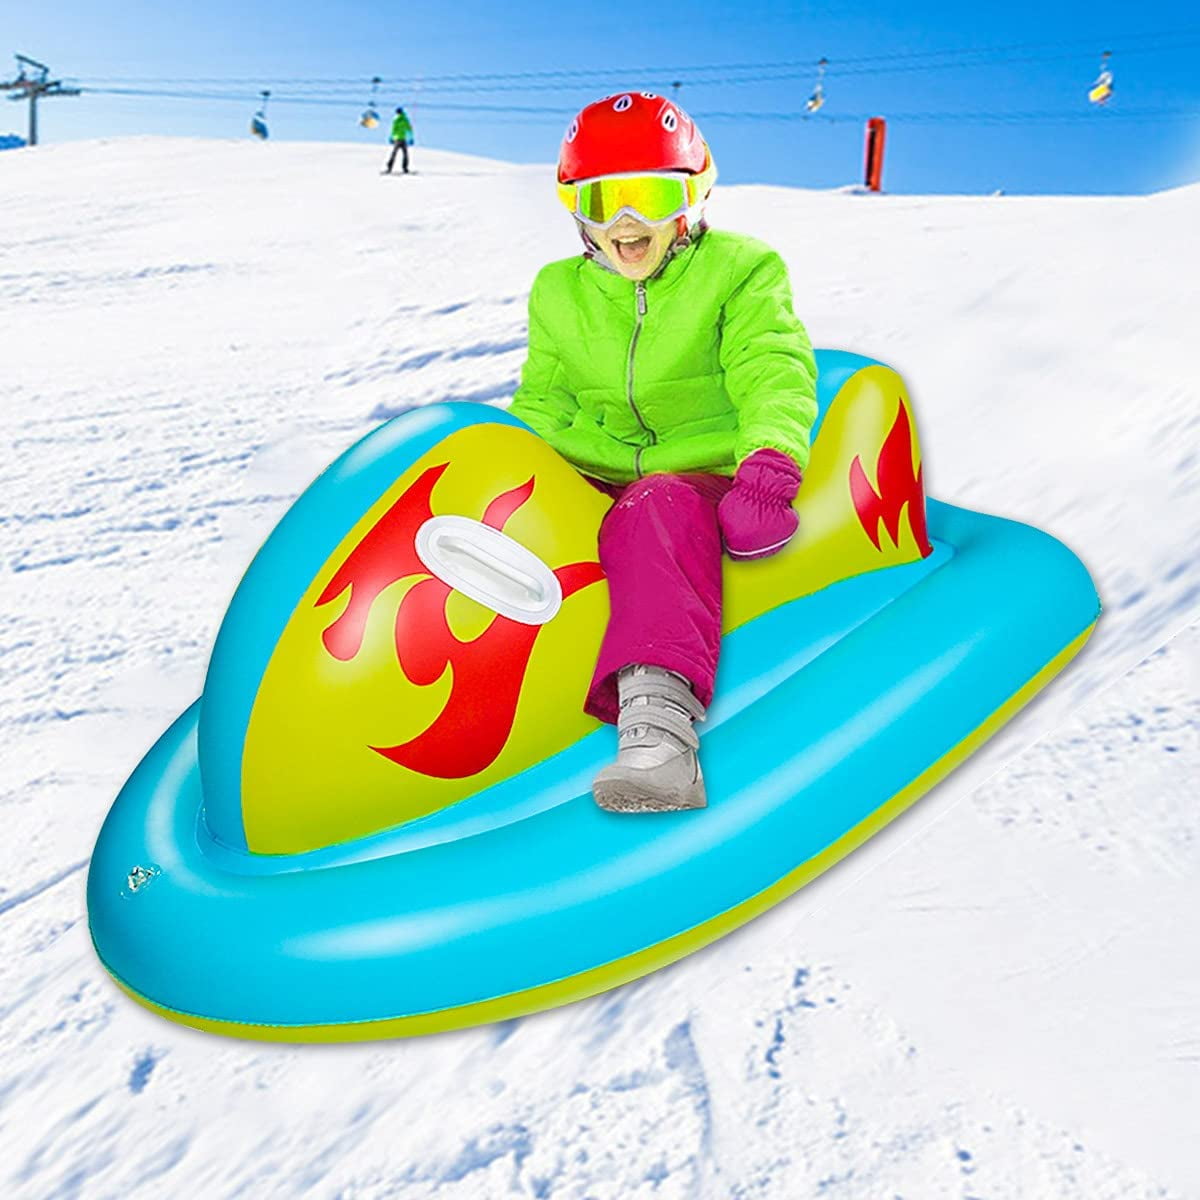 Heavy Duty Ski Snow Tube with Handles and Bottom Snow Tube 43 Inch Thickened Snow Sledding Tube for Outdoor Holidays Winter Inflatable Snow Sled Toboggan for Kids and Adults 